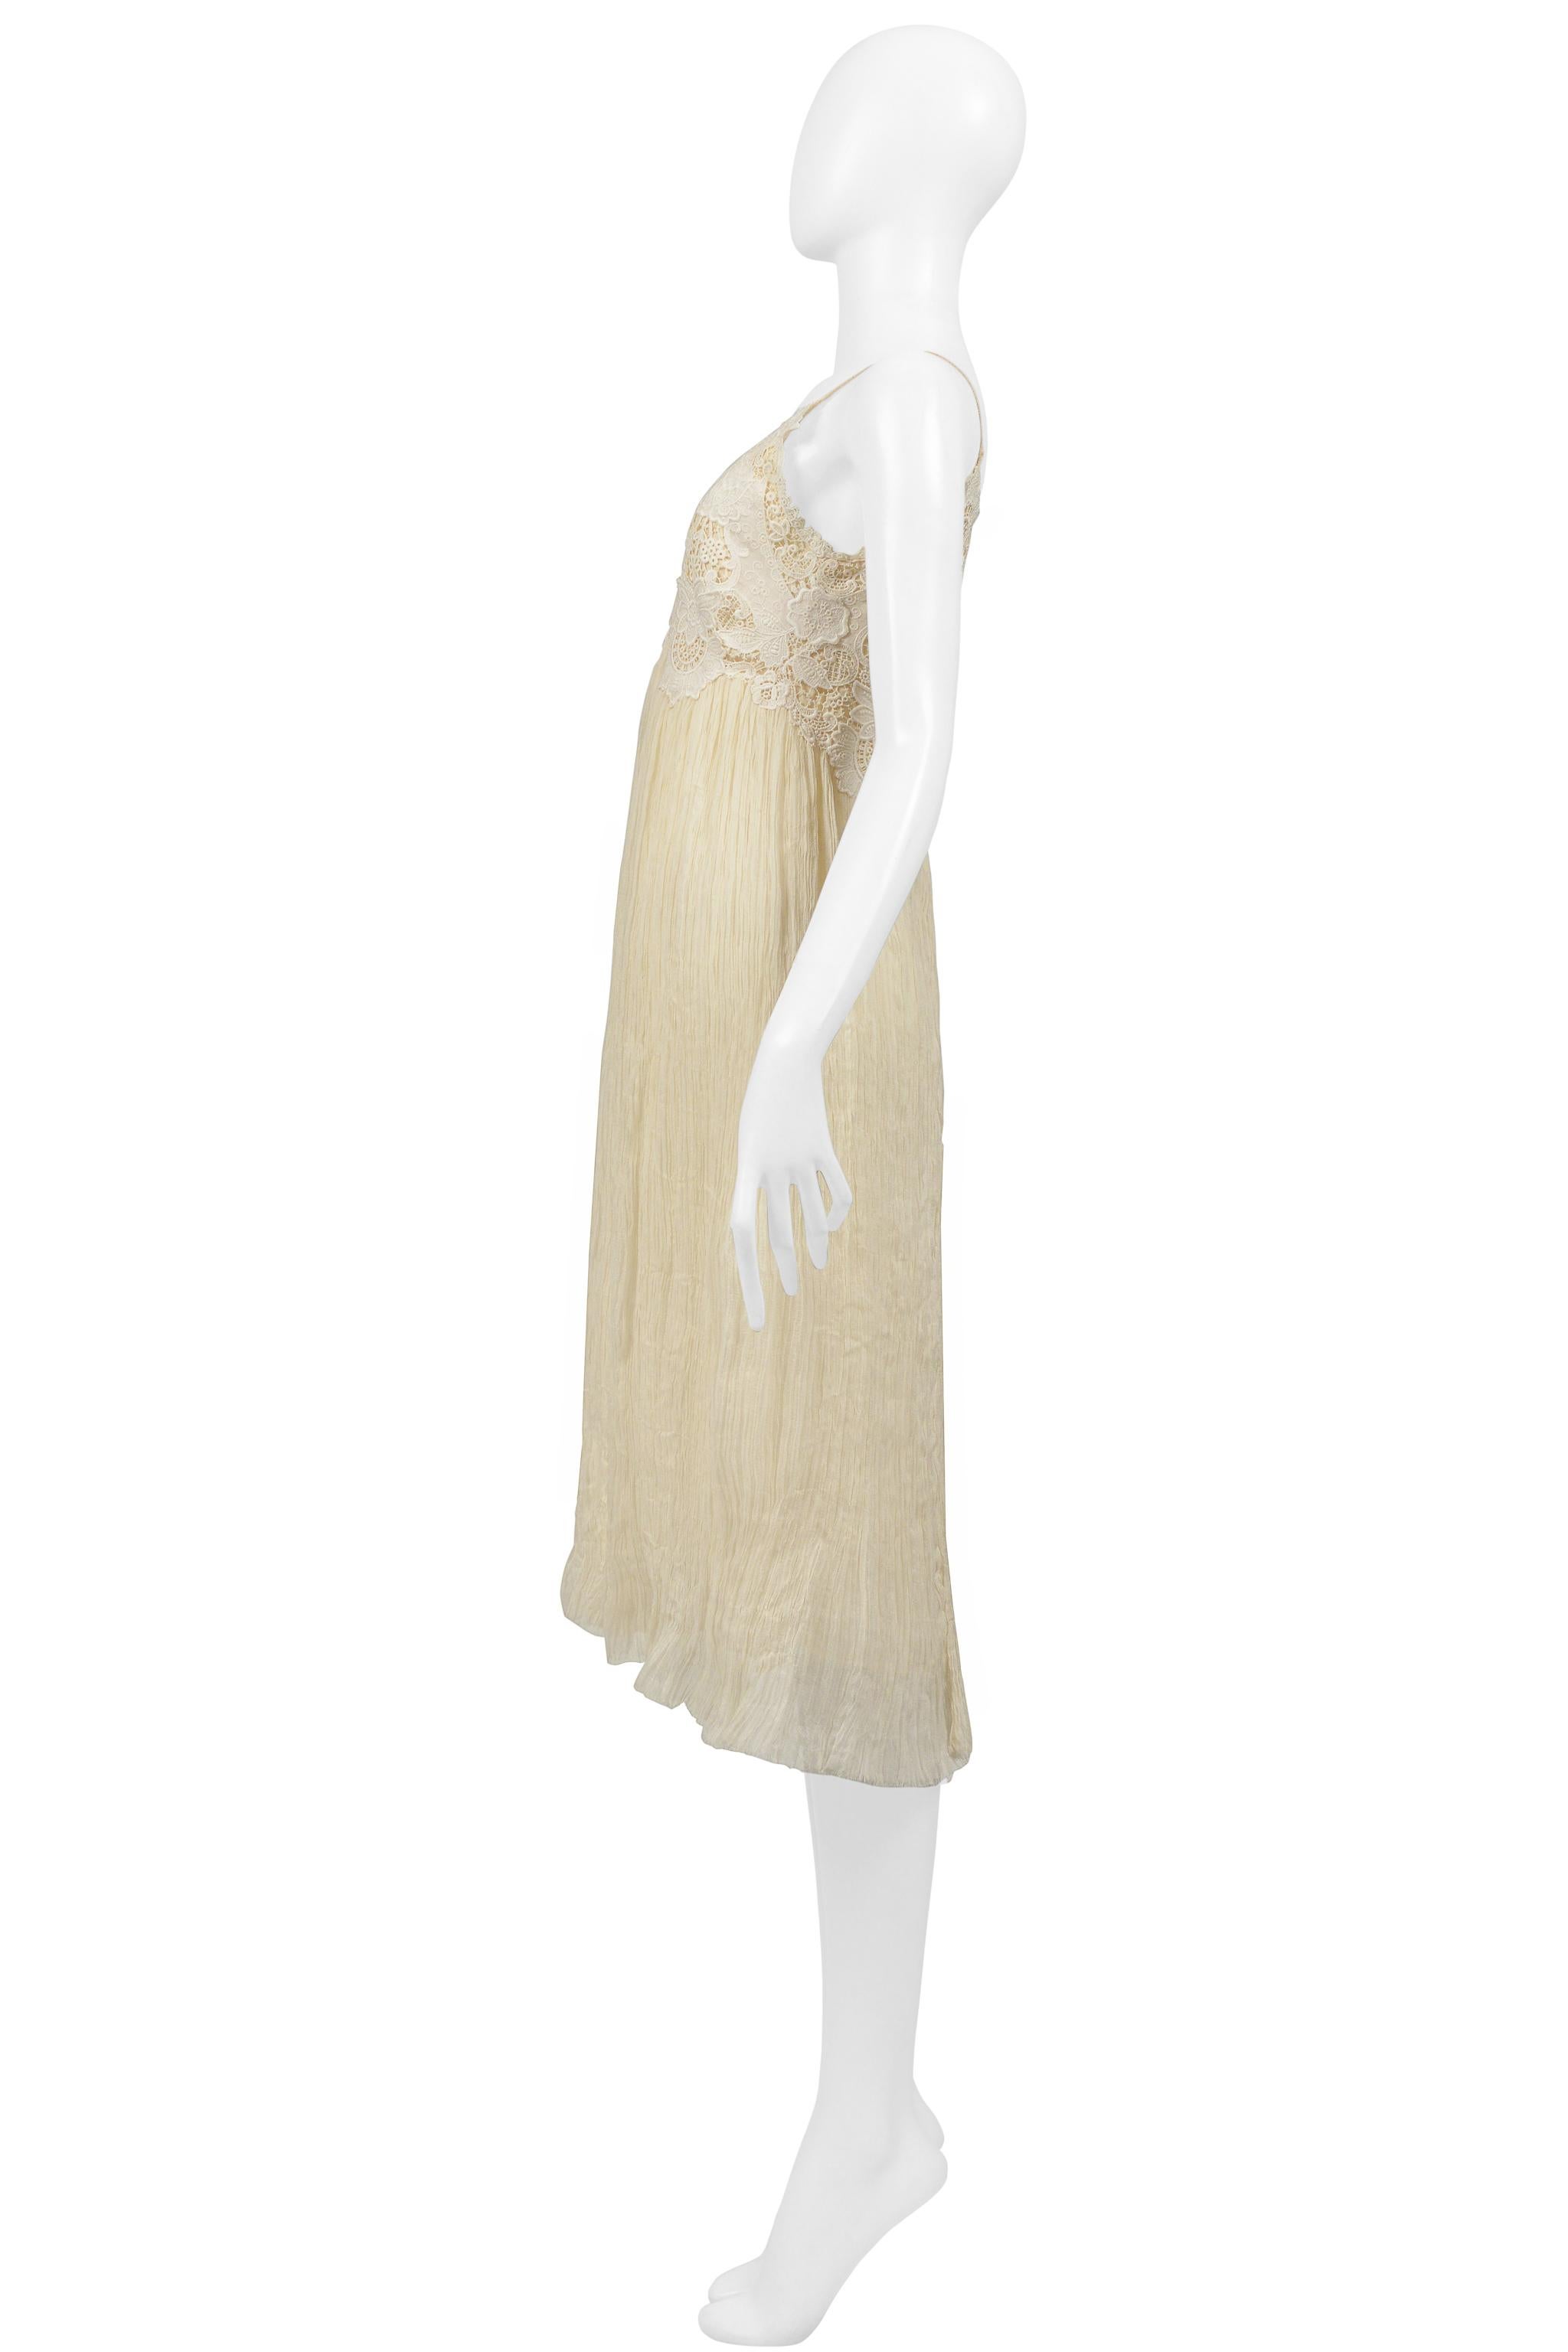 Alexander McQueen Off White Crinkle Dress W Lace Bodice 2005 For Sale 4